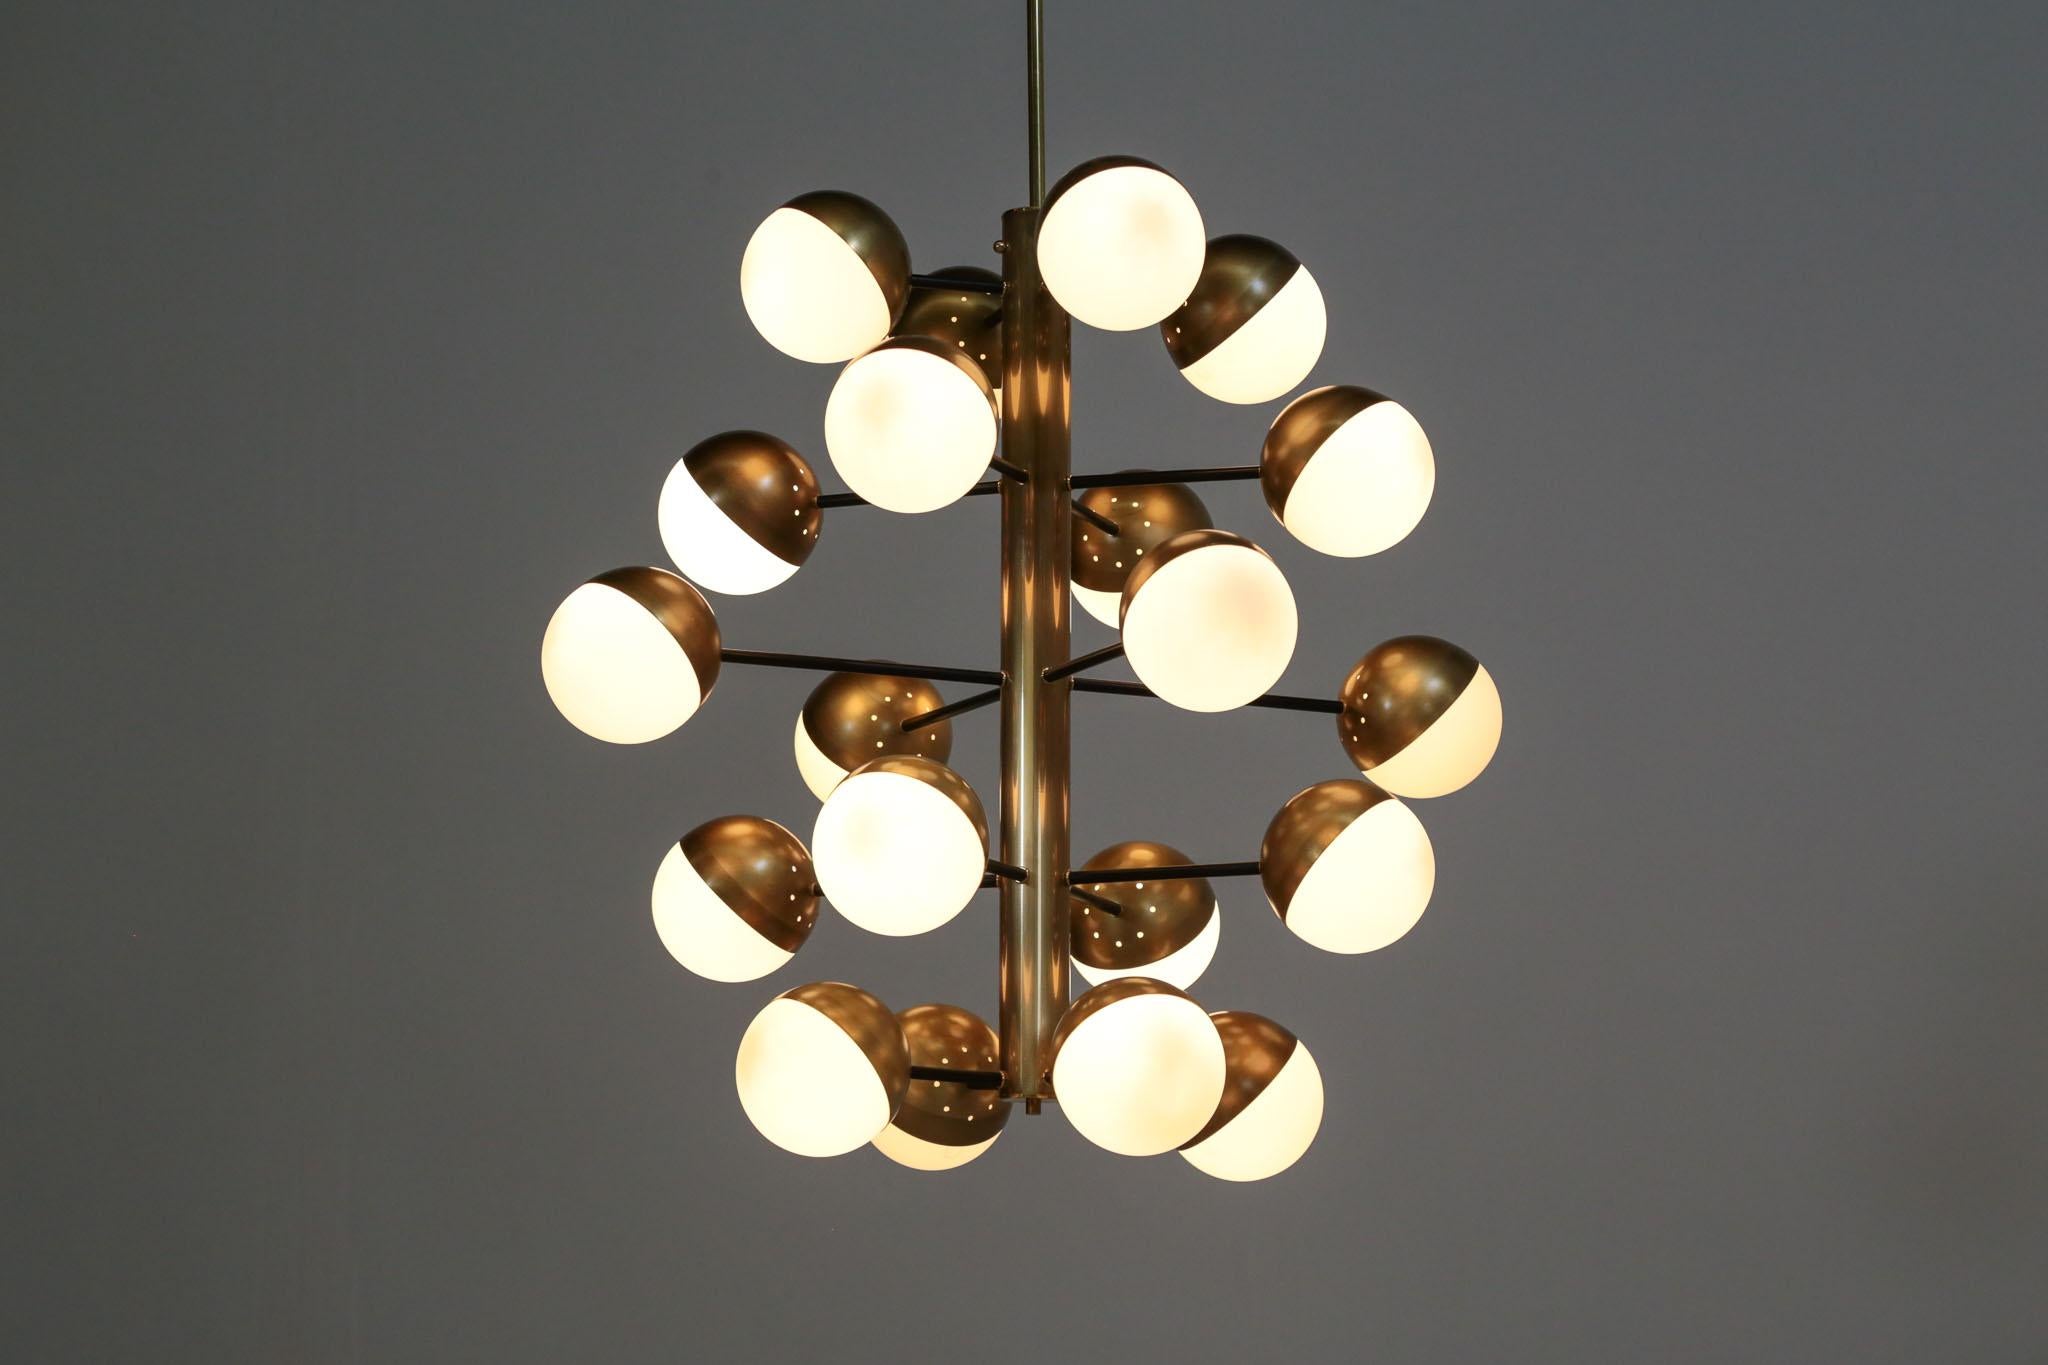 Really nice cloud modern chandelier, structure in brass with 20 opaline globes.
Massive chandelier in the style of Stilnovo. 
Artisanal work.
E14 bulb.